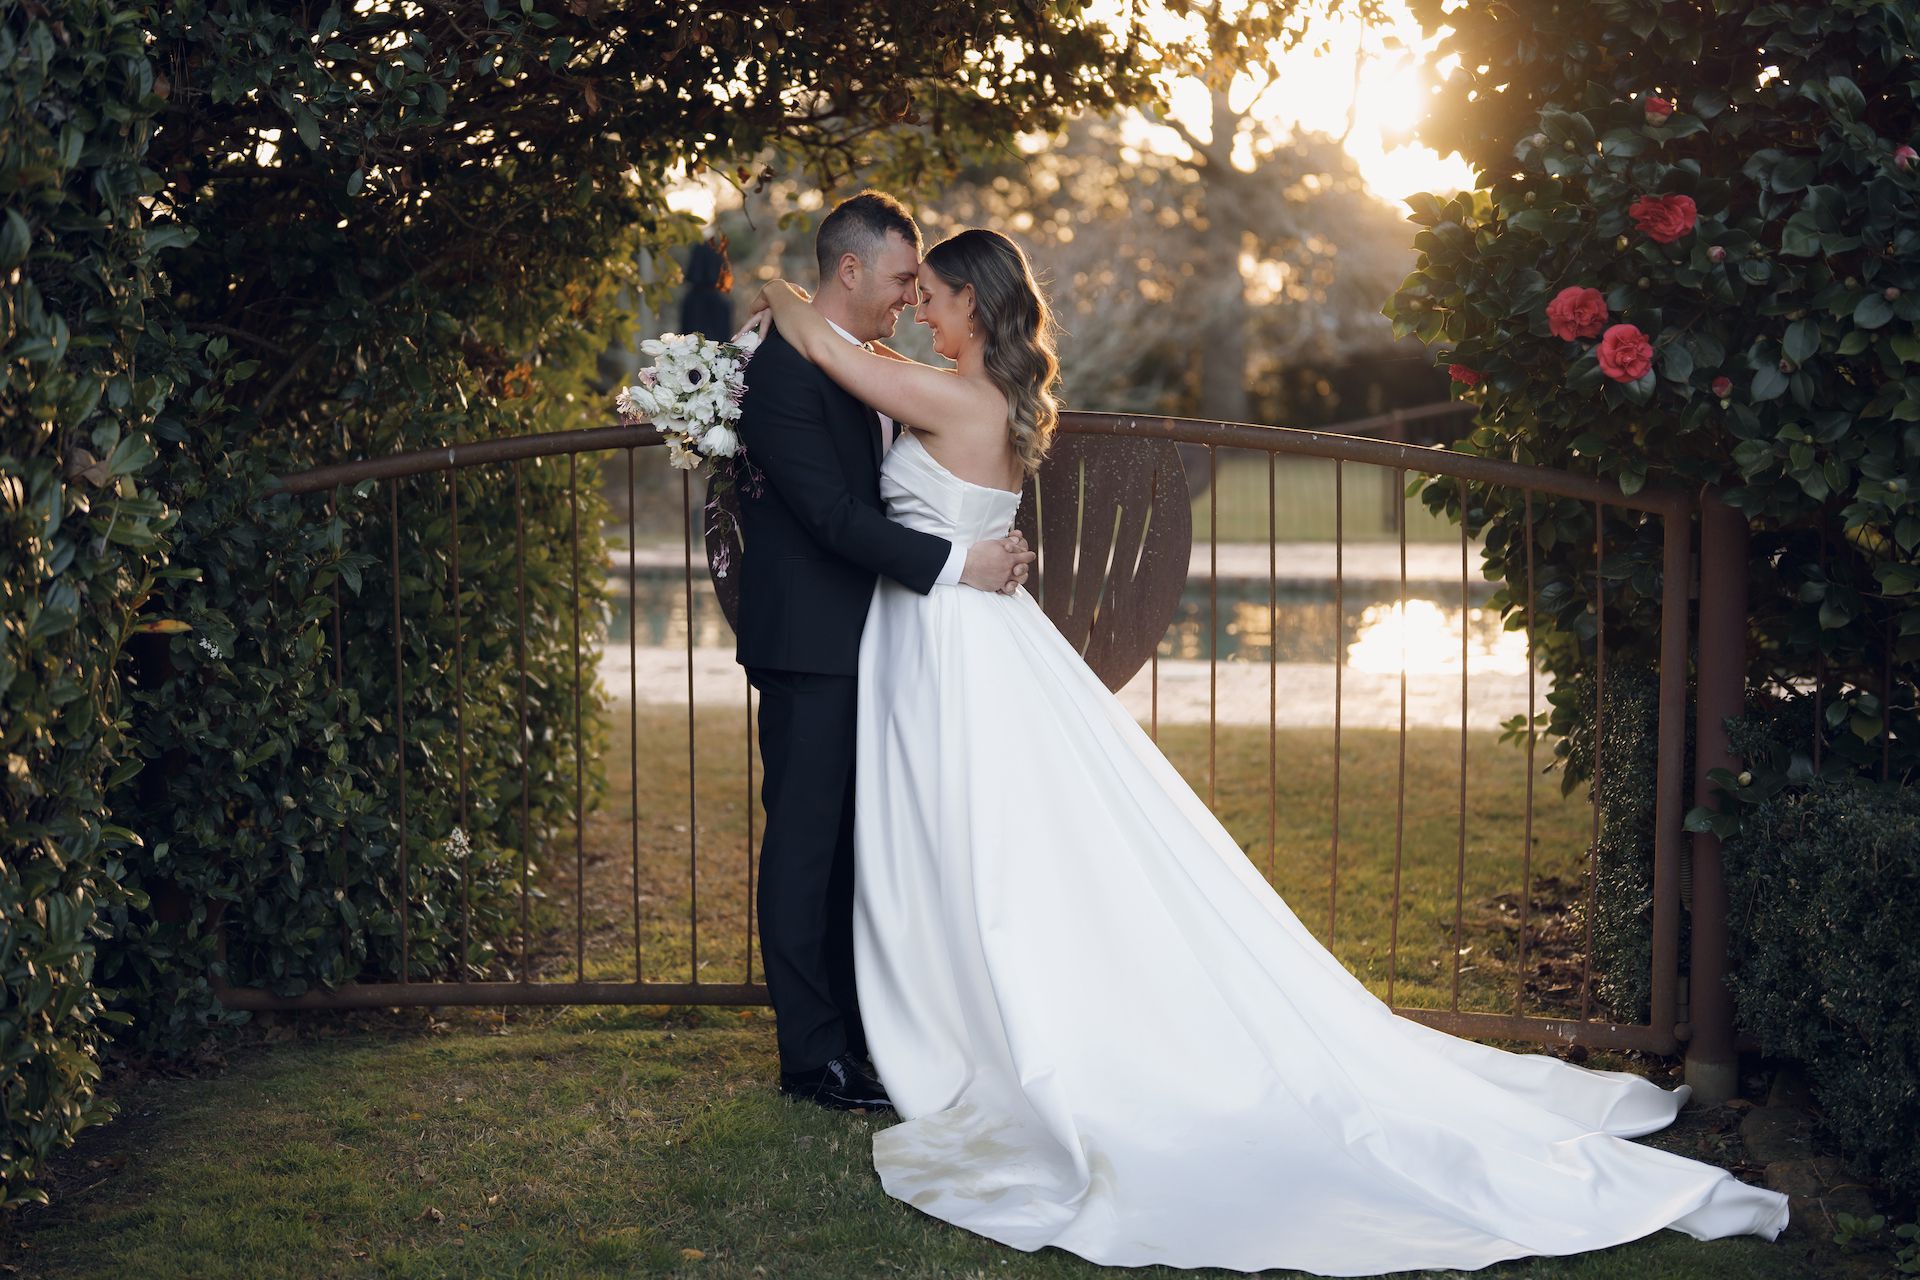 Newlyweds hugging and posing for a photo - raw footage wedding videography services in the Southern Highlands and surrounding areas - Just Footage